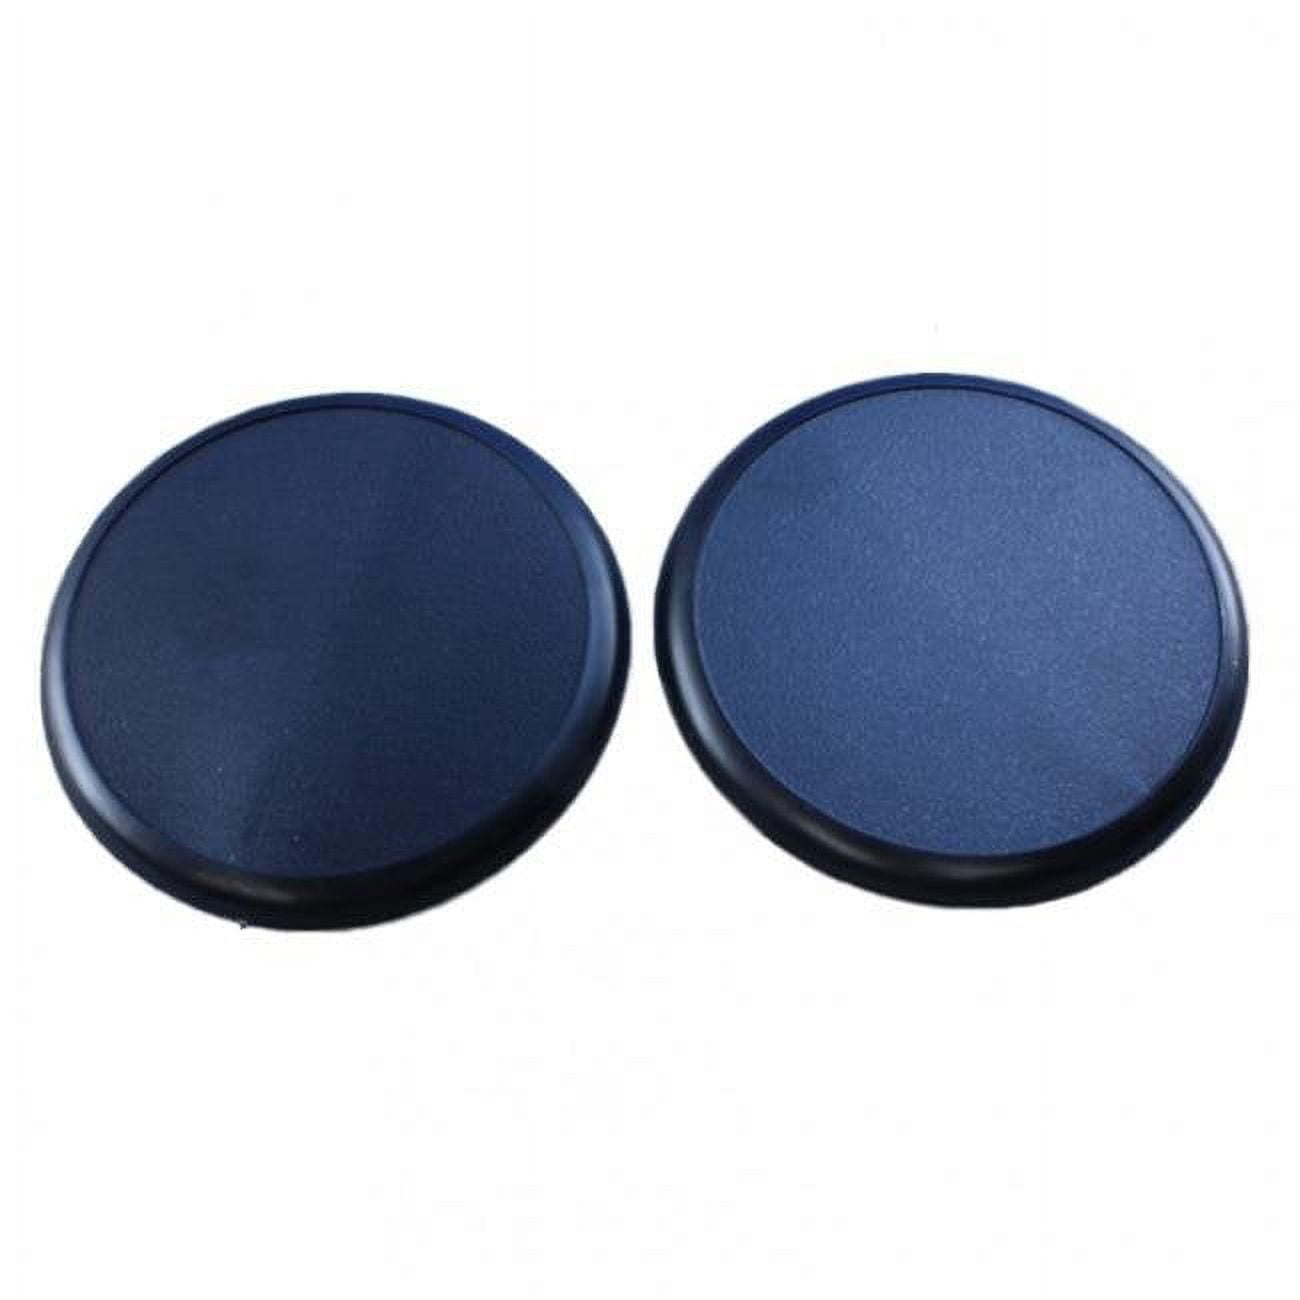 60 Mm Round Plastic Miniature Display Base - 10 Count